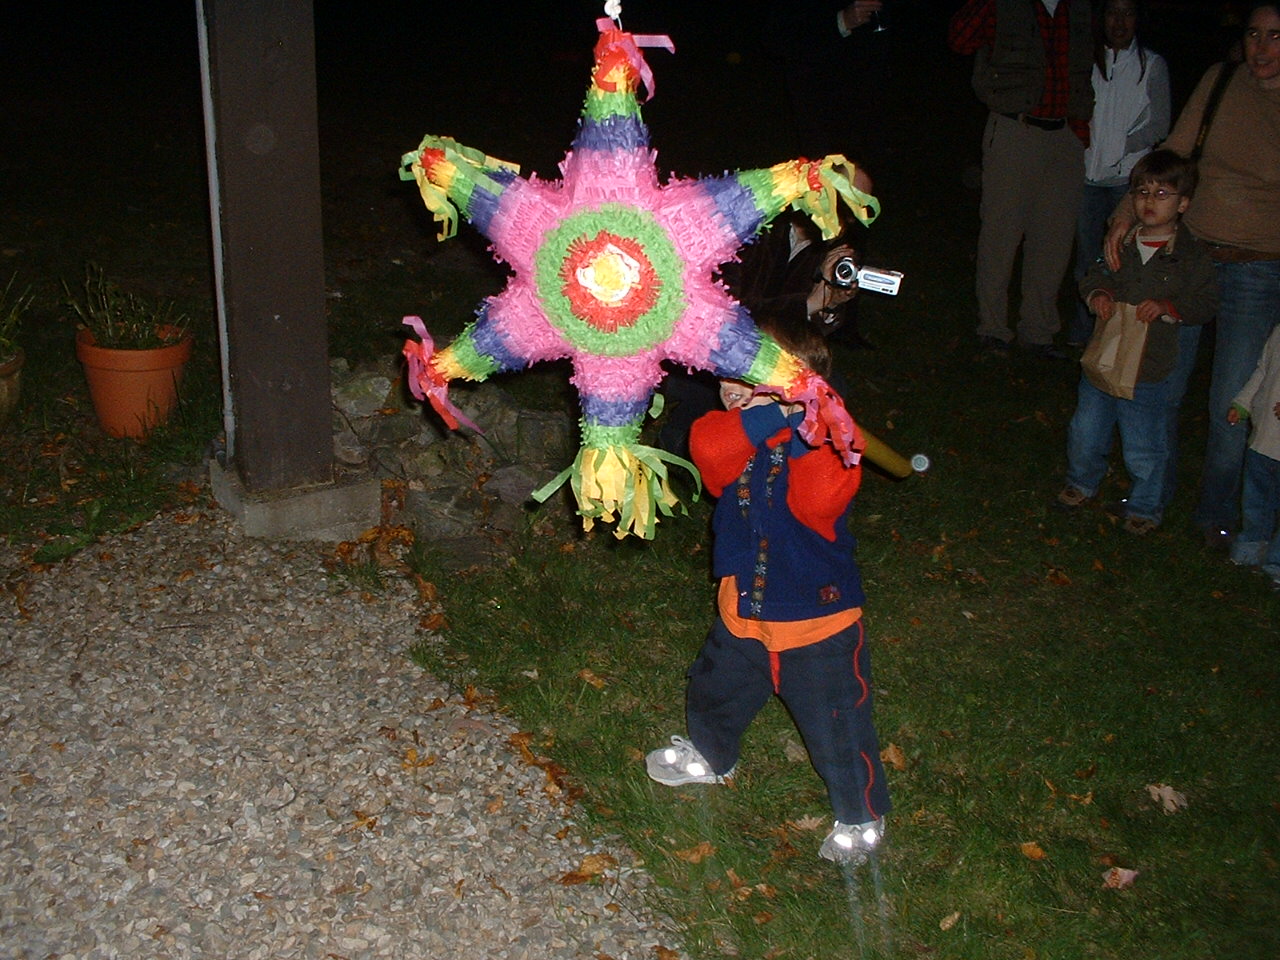 a person is using a kite as decoration